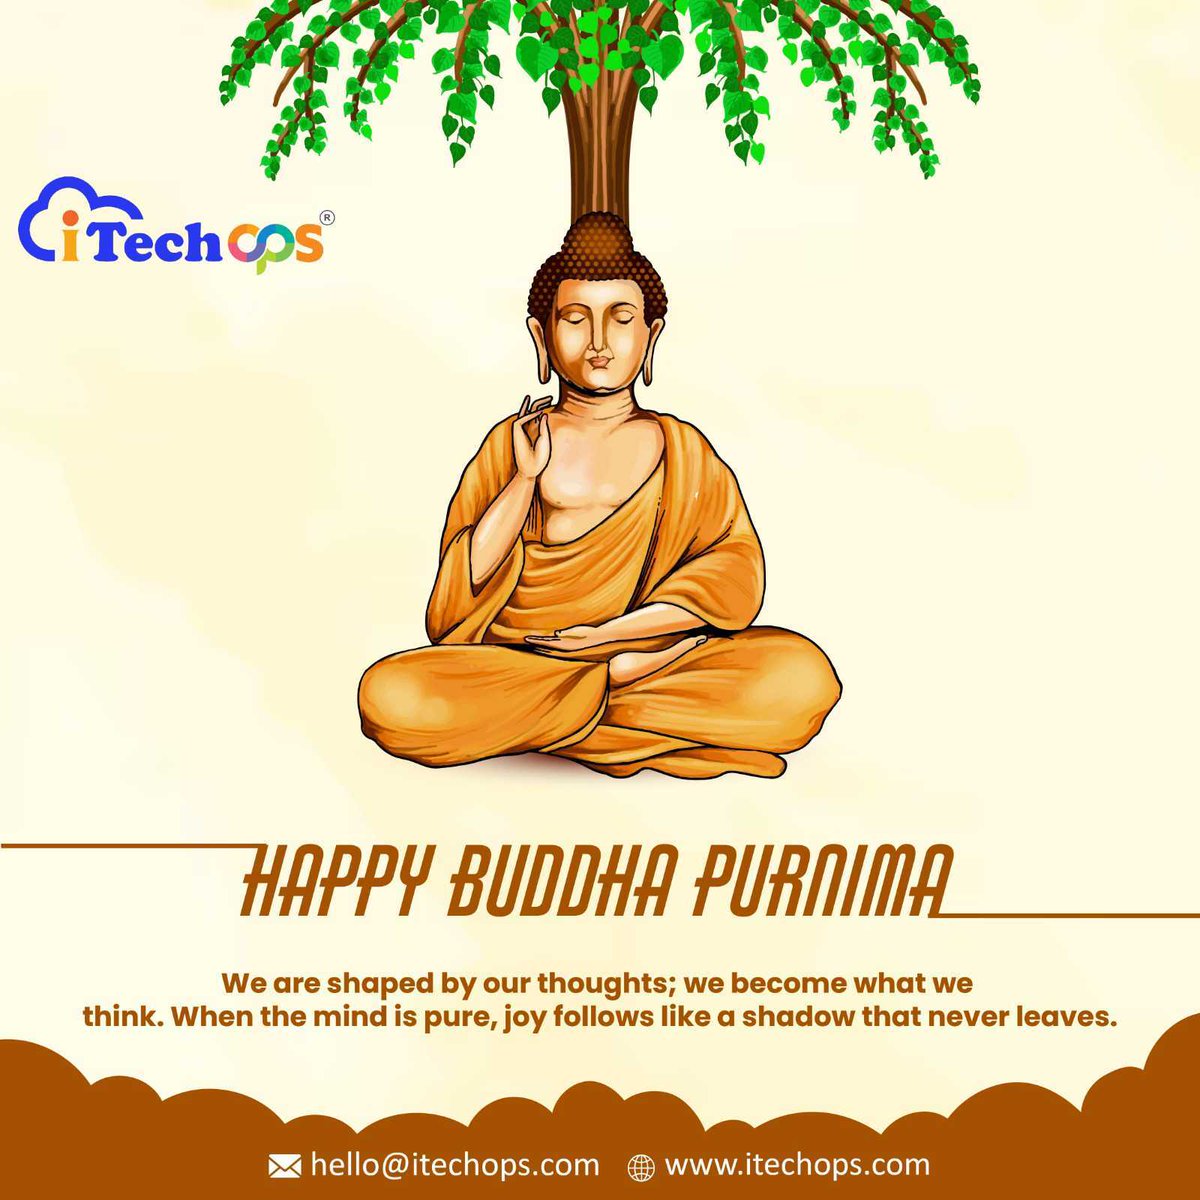 Wishing you a blessed Buddha Purnima filled with love, peace, and happiness.

 #DevOps #devsecops #dockers #awscloud #itechops #customsoftware #itcompany #ahmedabad #azure #startupindia #OpenShift #cloudcomputing